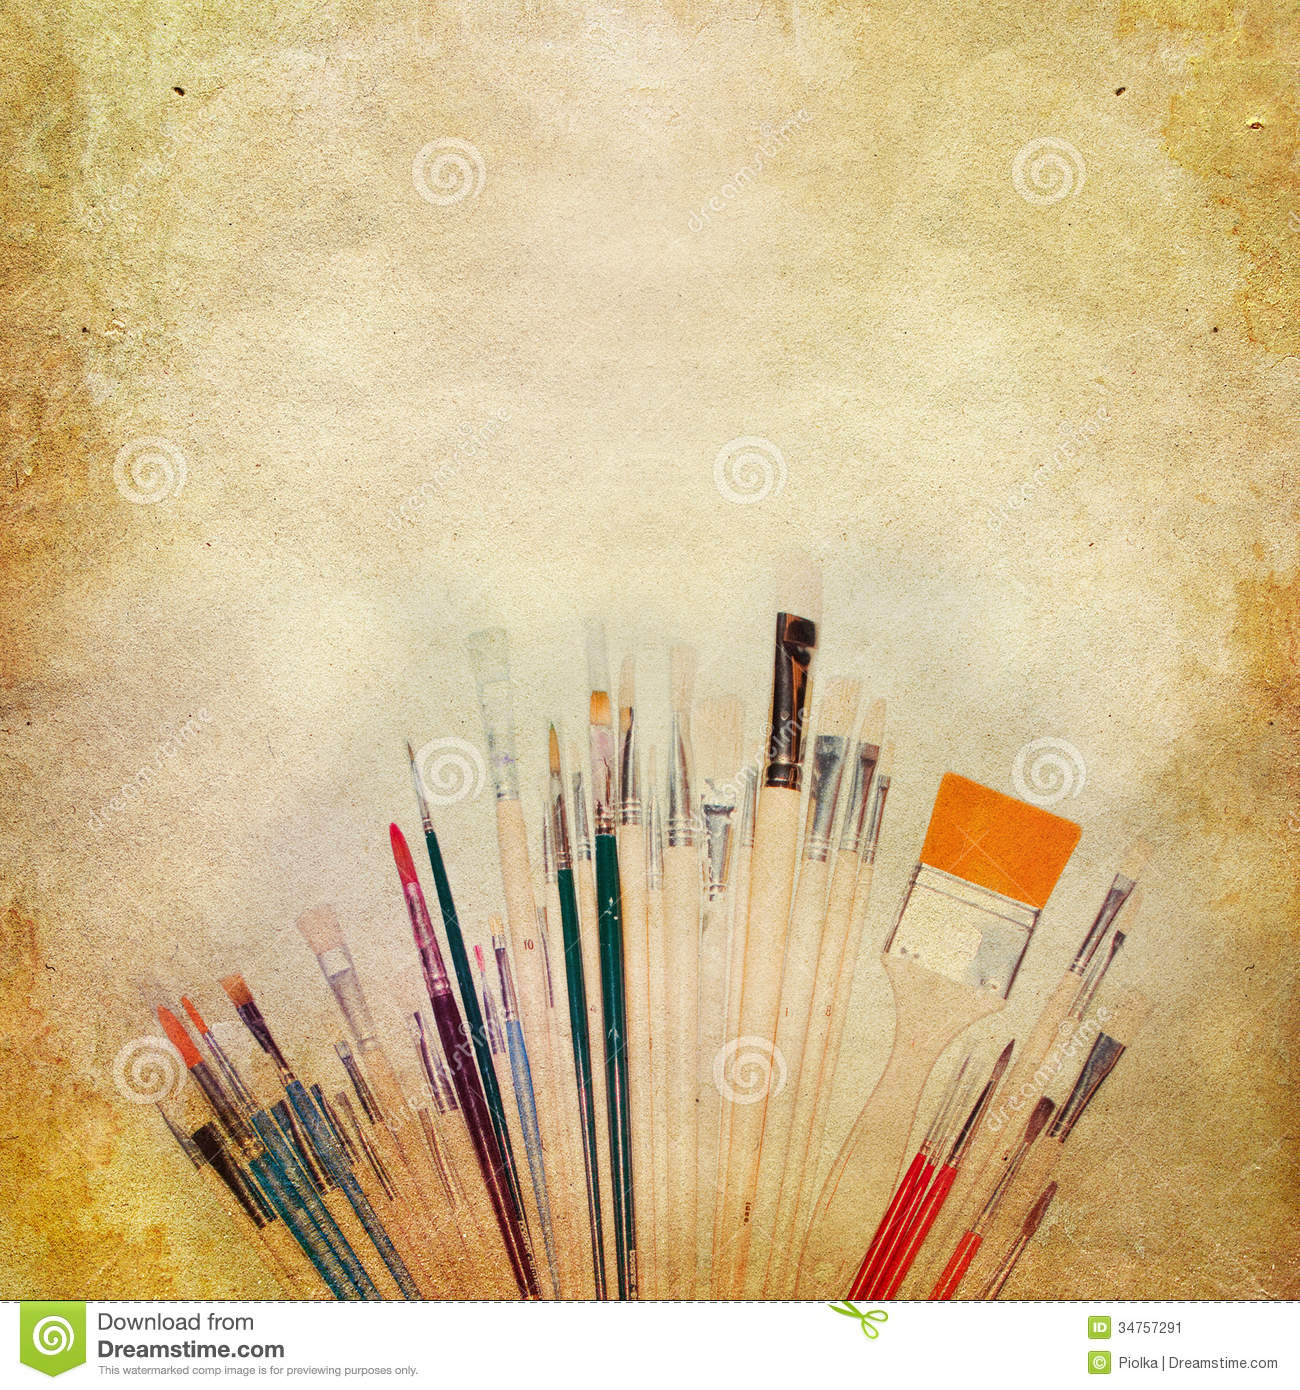 Top Paint Brushes Wallpaper Image For